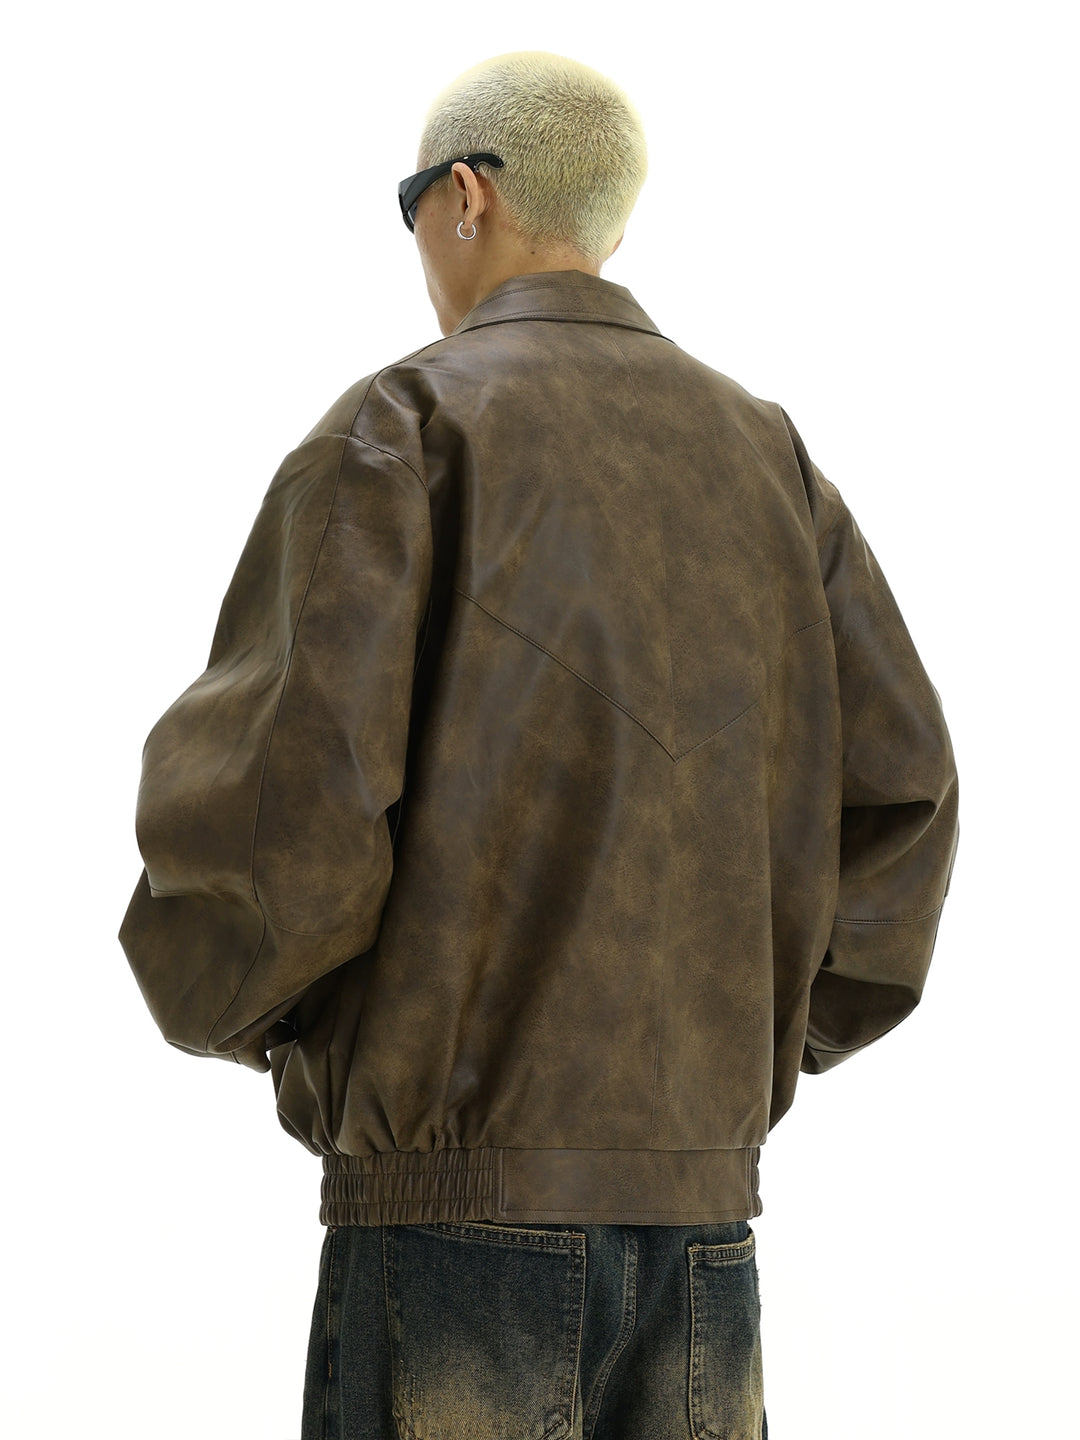 KC No. 501 Distressed Leather Jacket